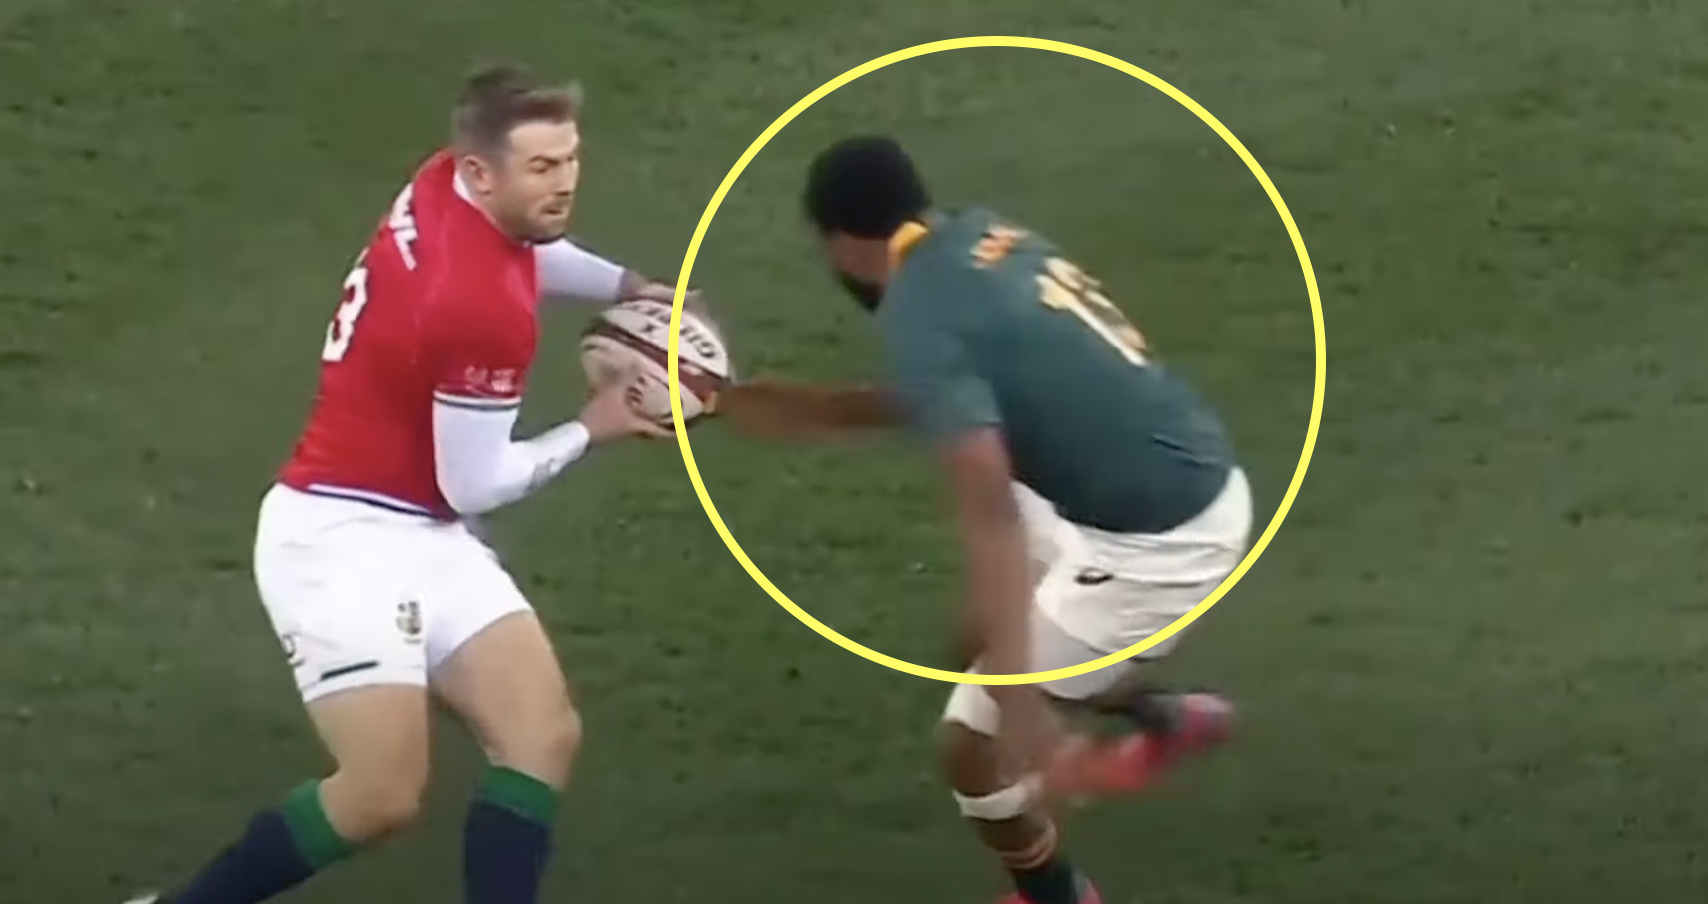 The monstrous tackle that defined the Springboks' year